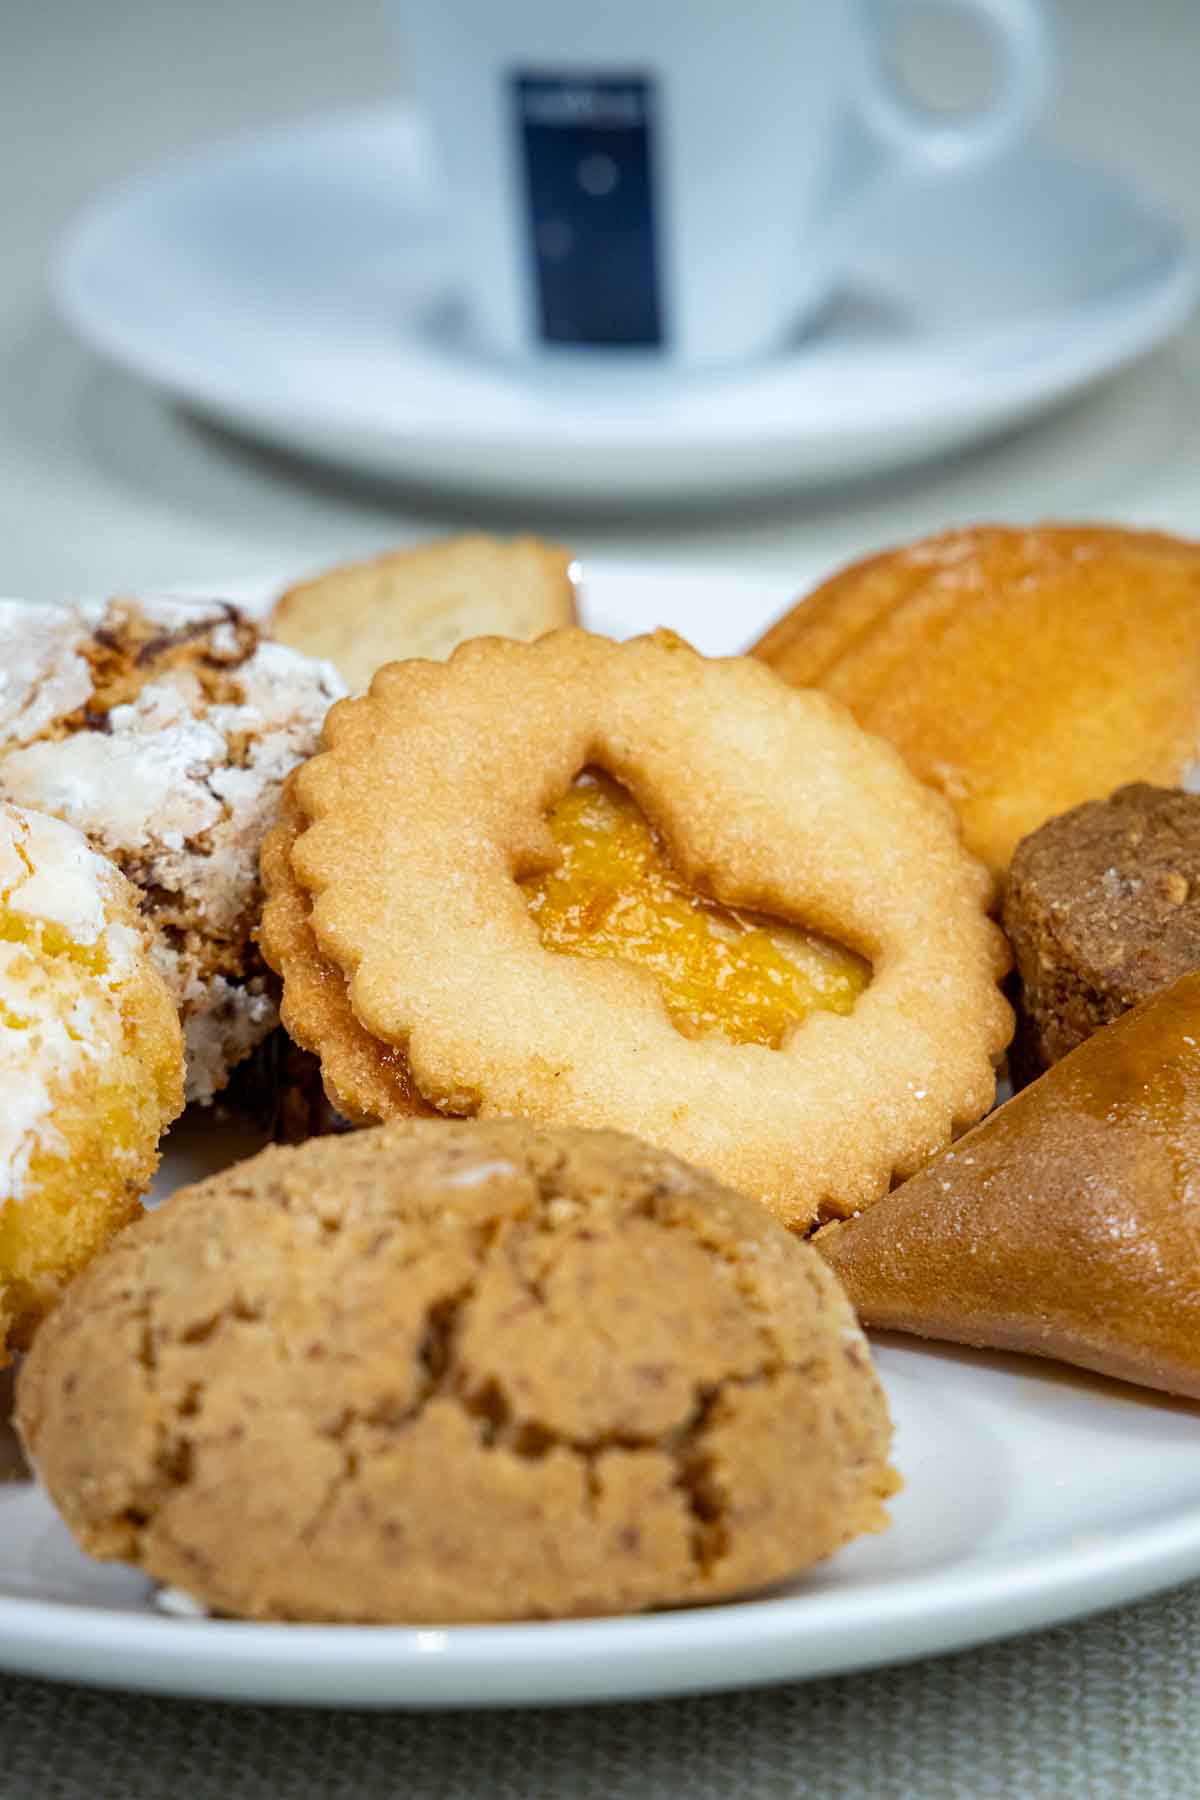 Moroccan Cookies and Pastries at Cous Cous Cafe